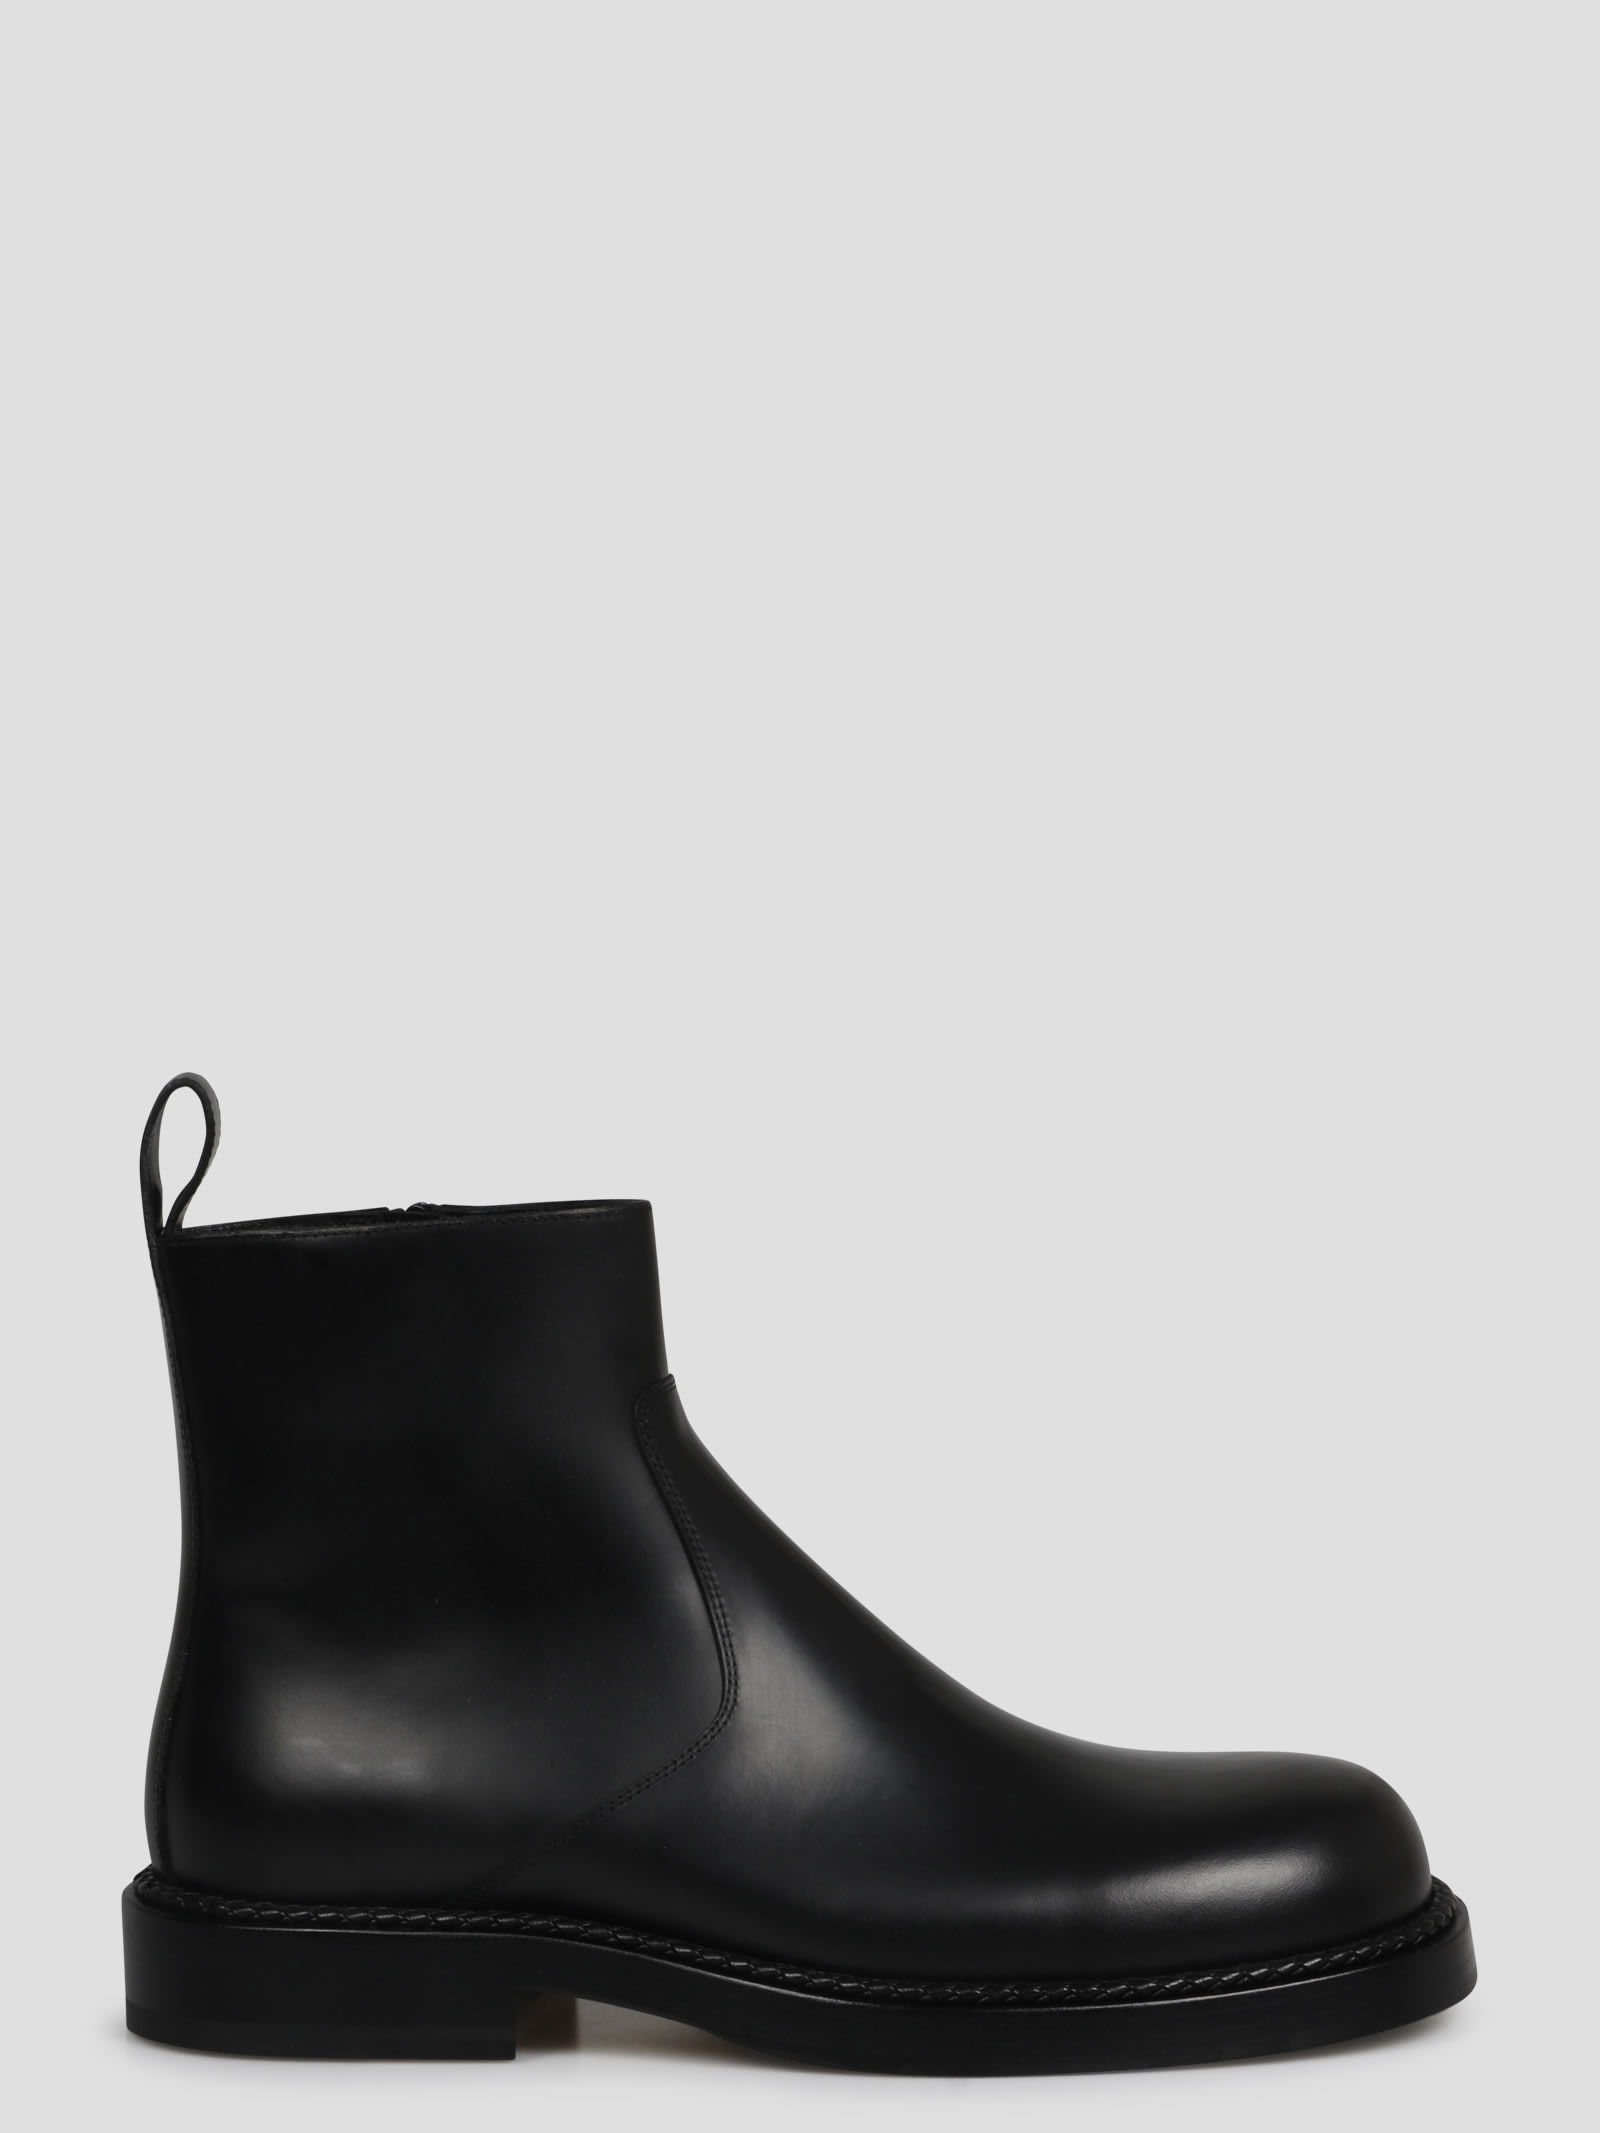 Strut Ankle Boots